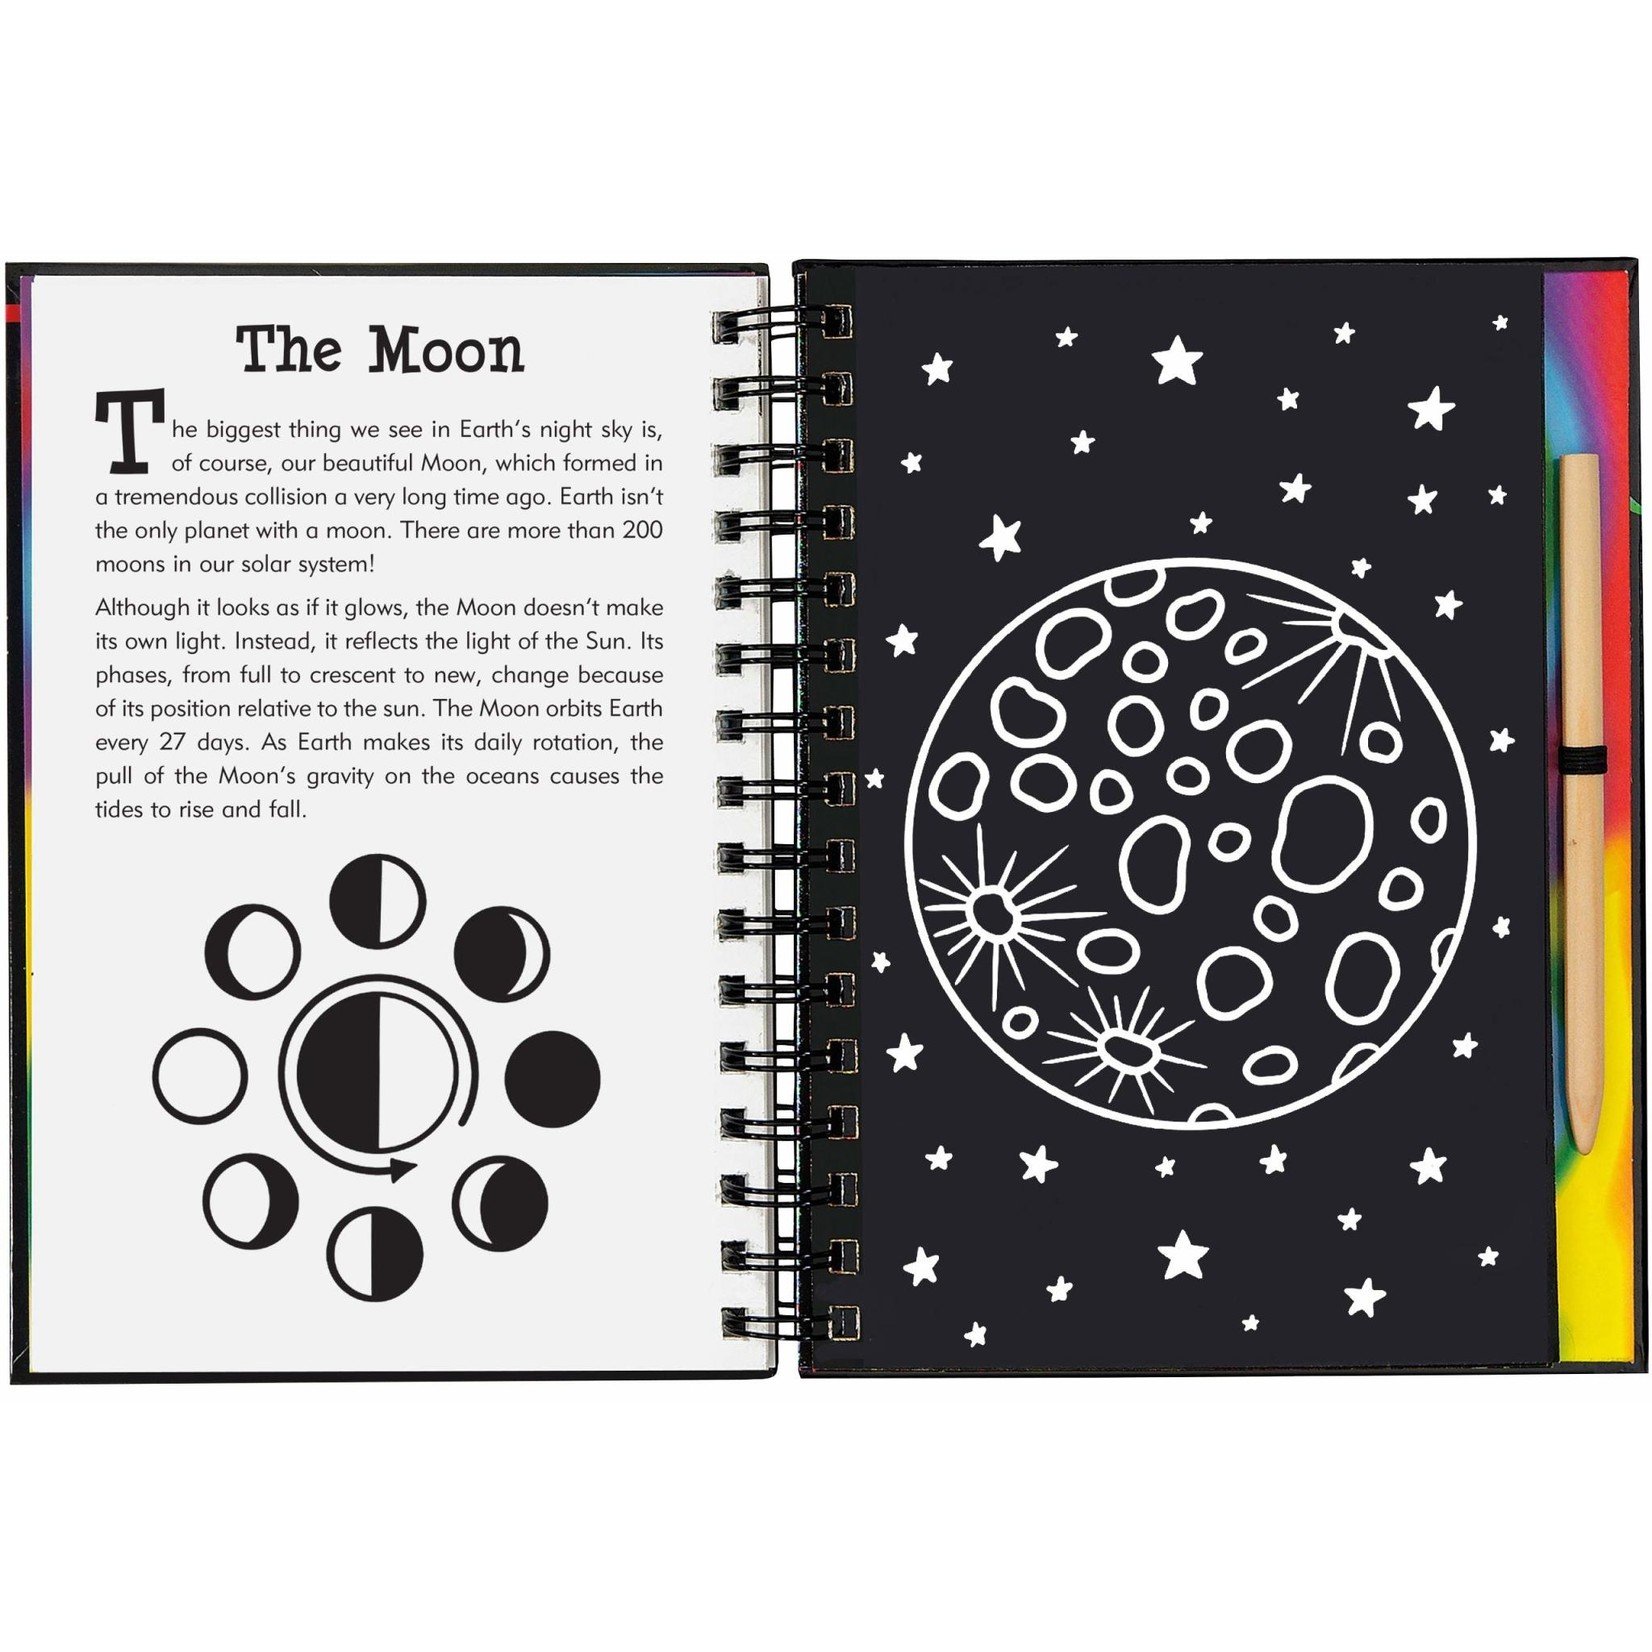 Draw-Along: Space Stickers [Book]